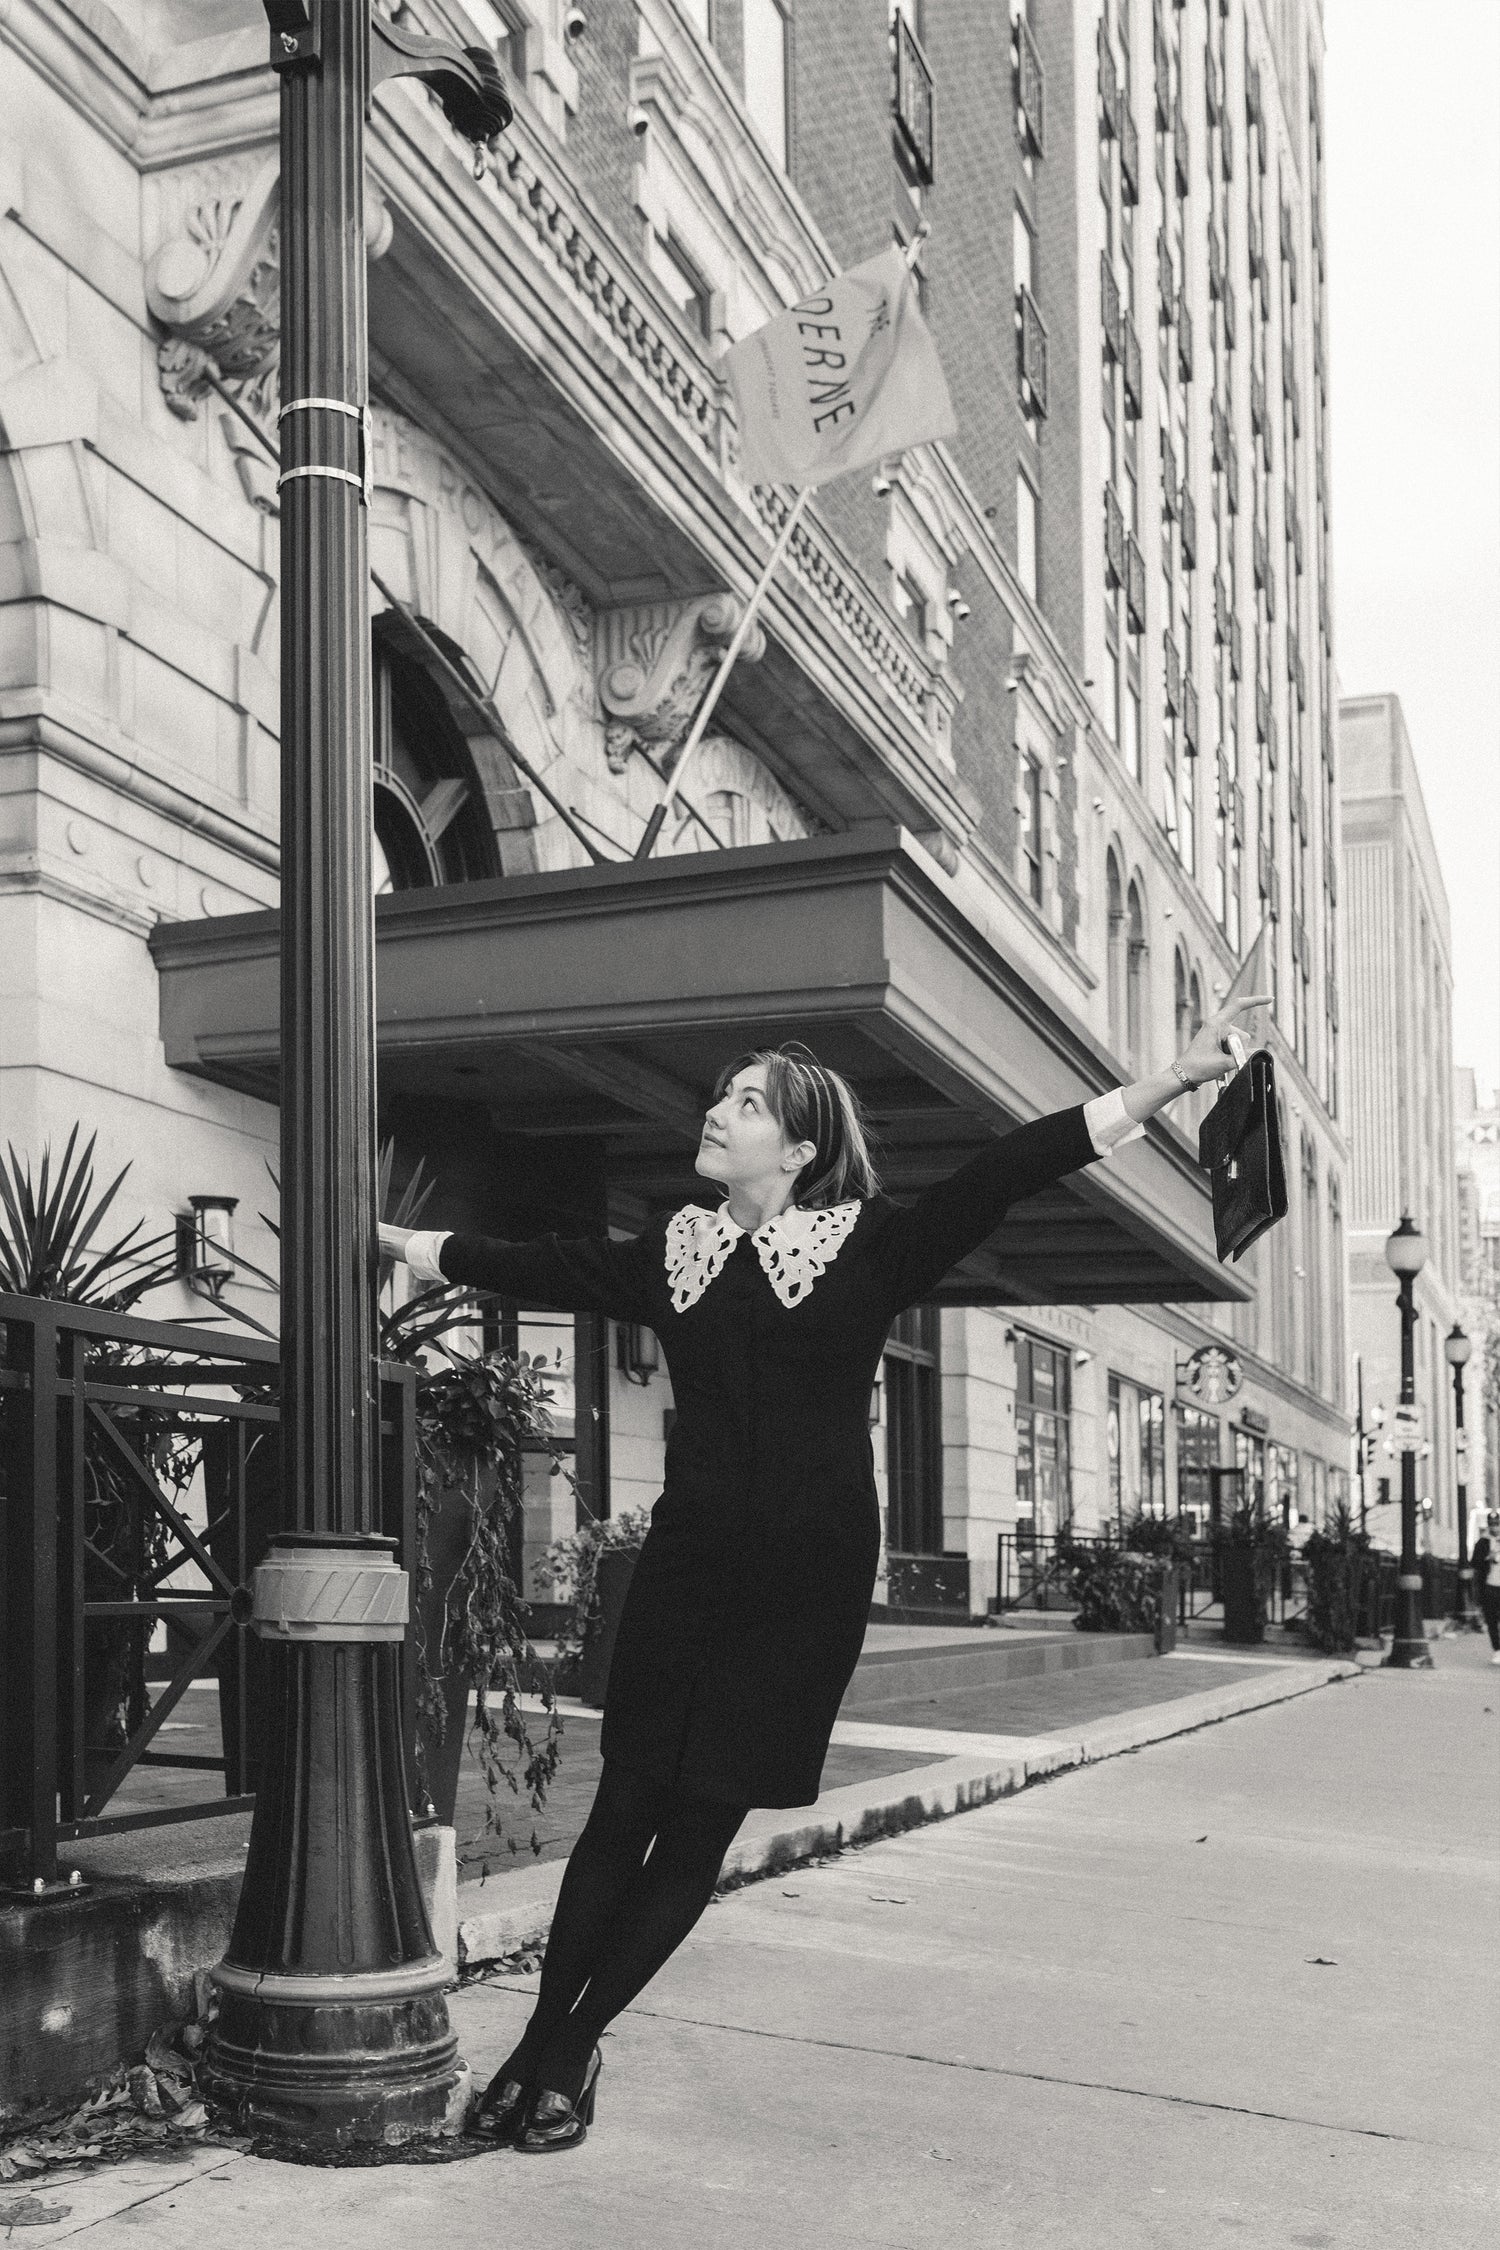 Vintage girl hangs on a lamp post in a black dress with large cream lace collar. Old architecture surrounds her.